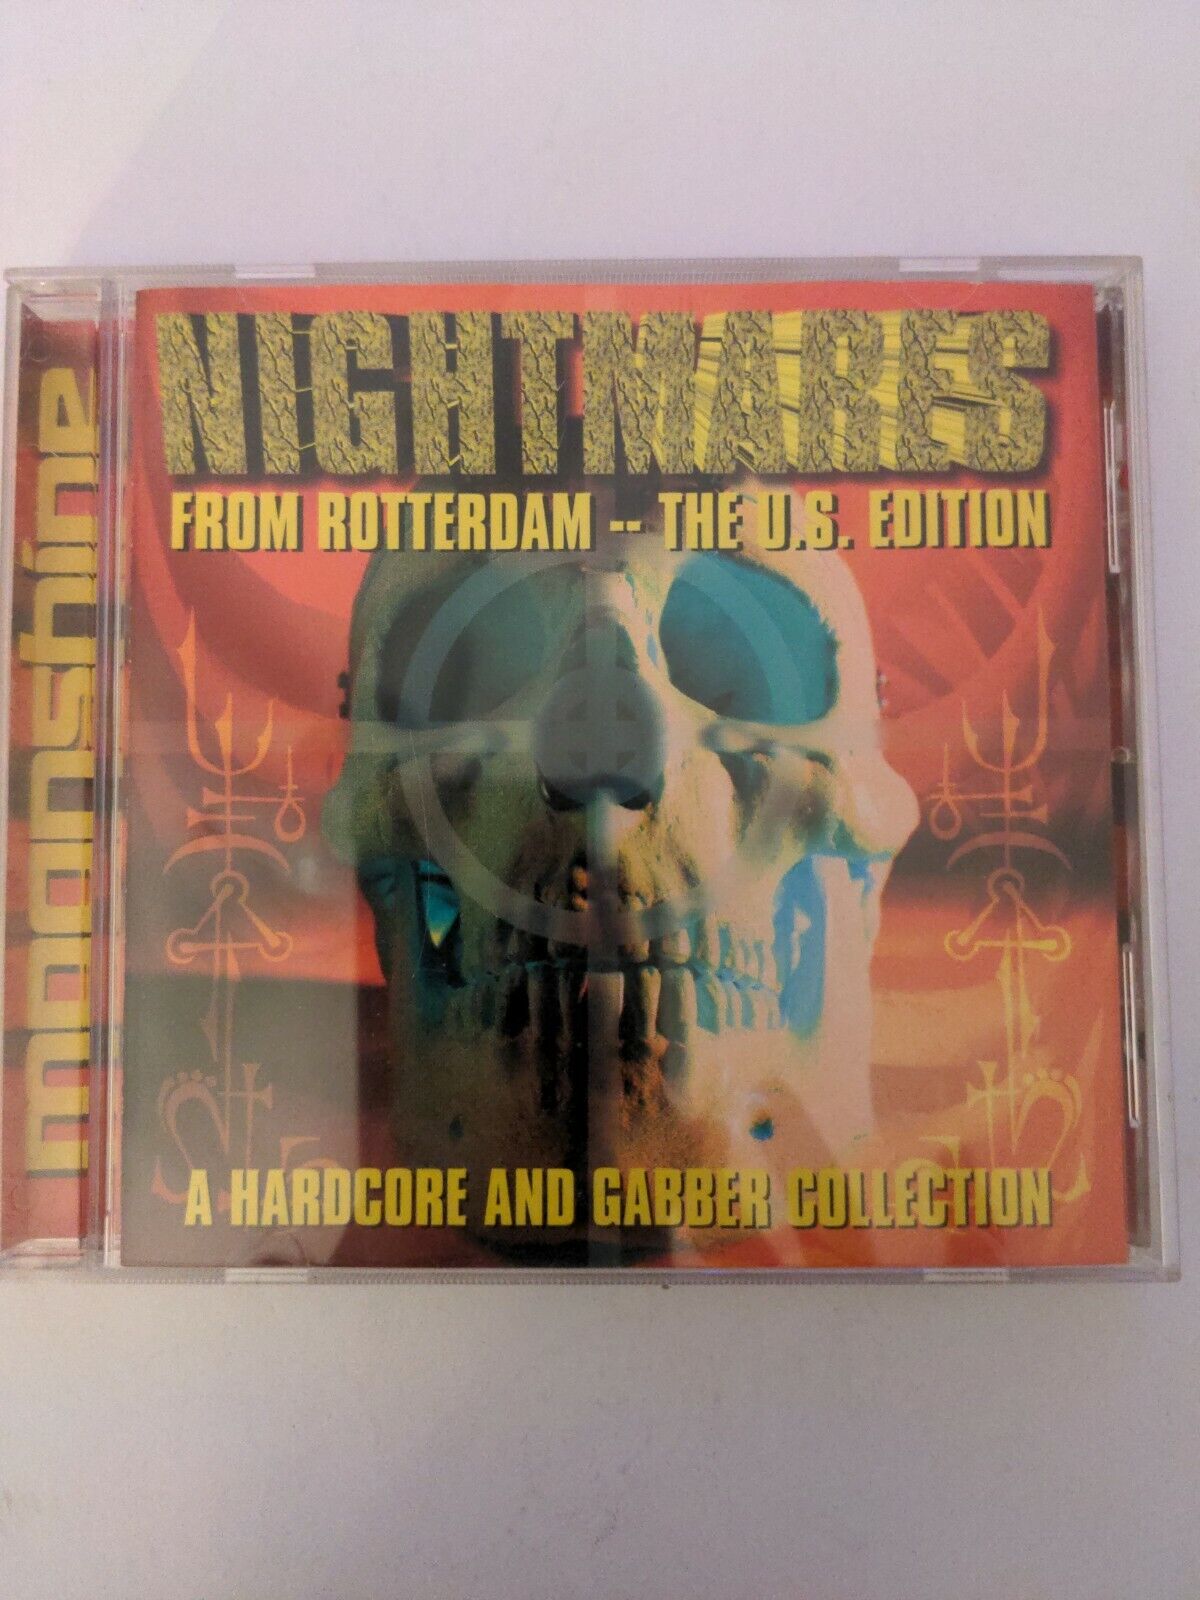 Nightmares from Rotterdam: U.S. Edition [PA] by Various Artists (CD,...